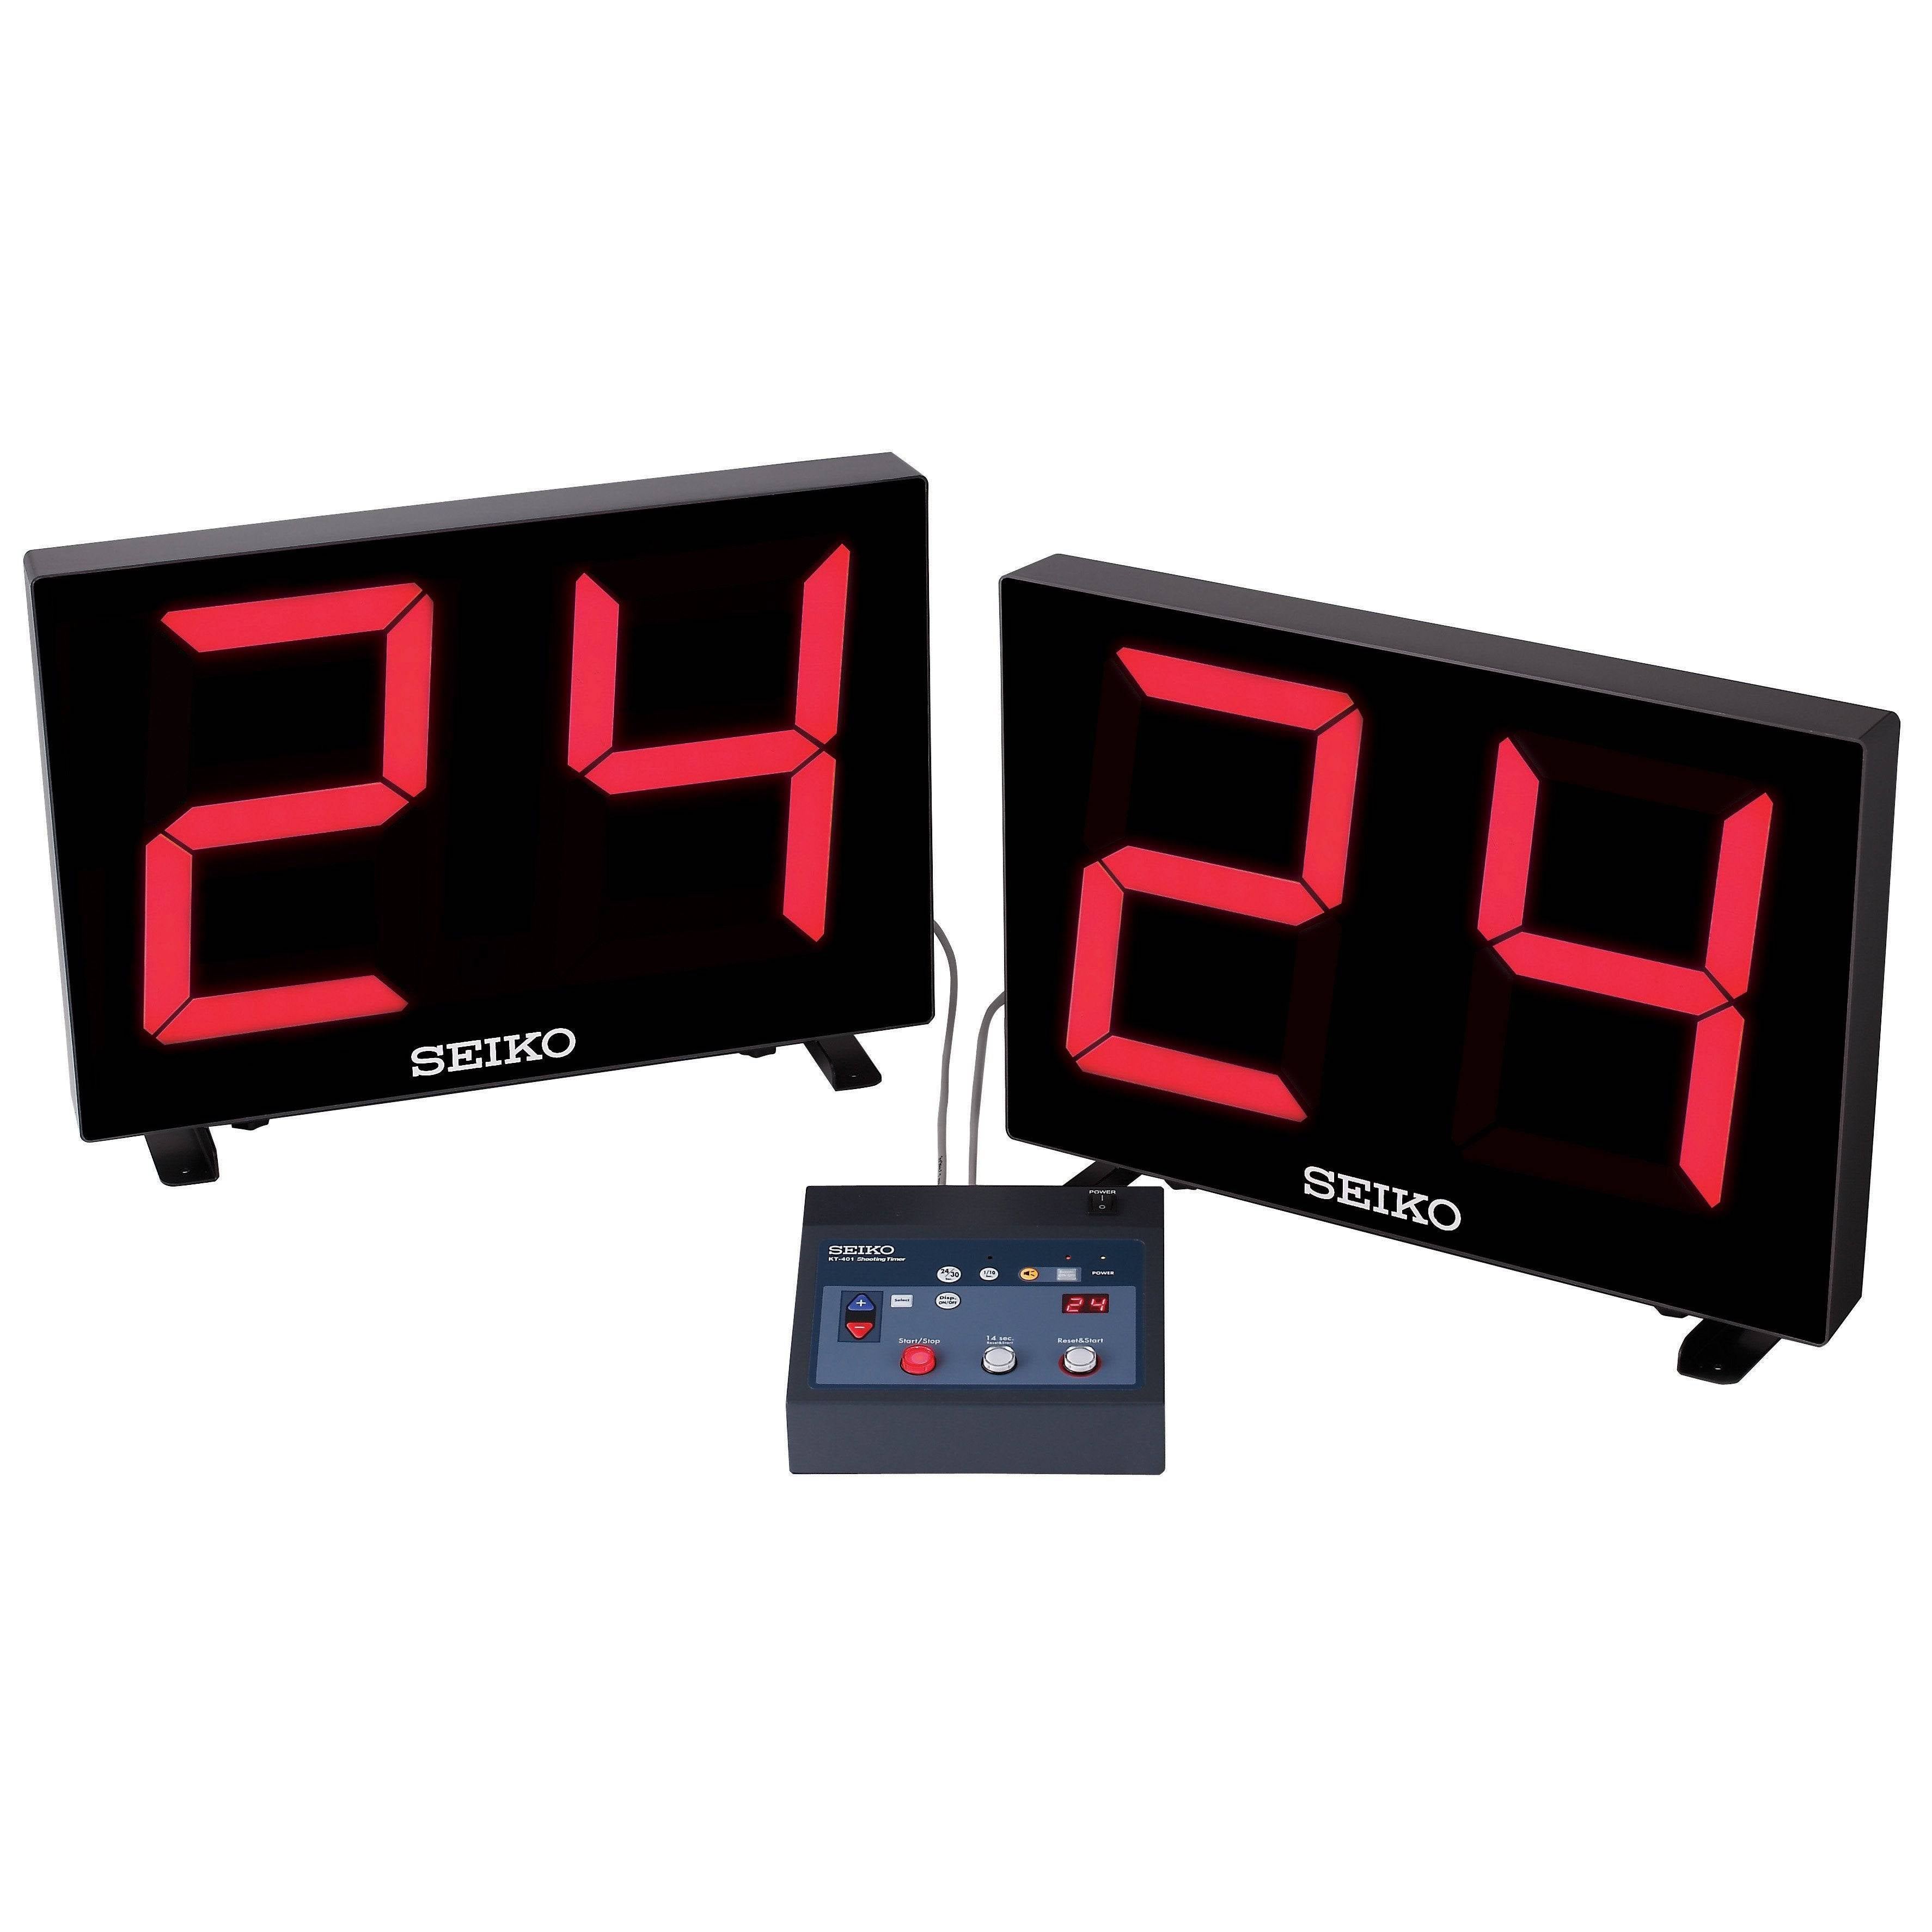 Seiko KT-401 Shot Clock with 9.84-Inch LED Digits By CEI